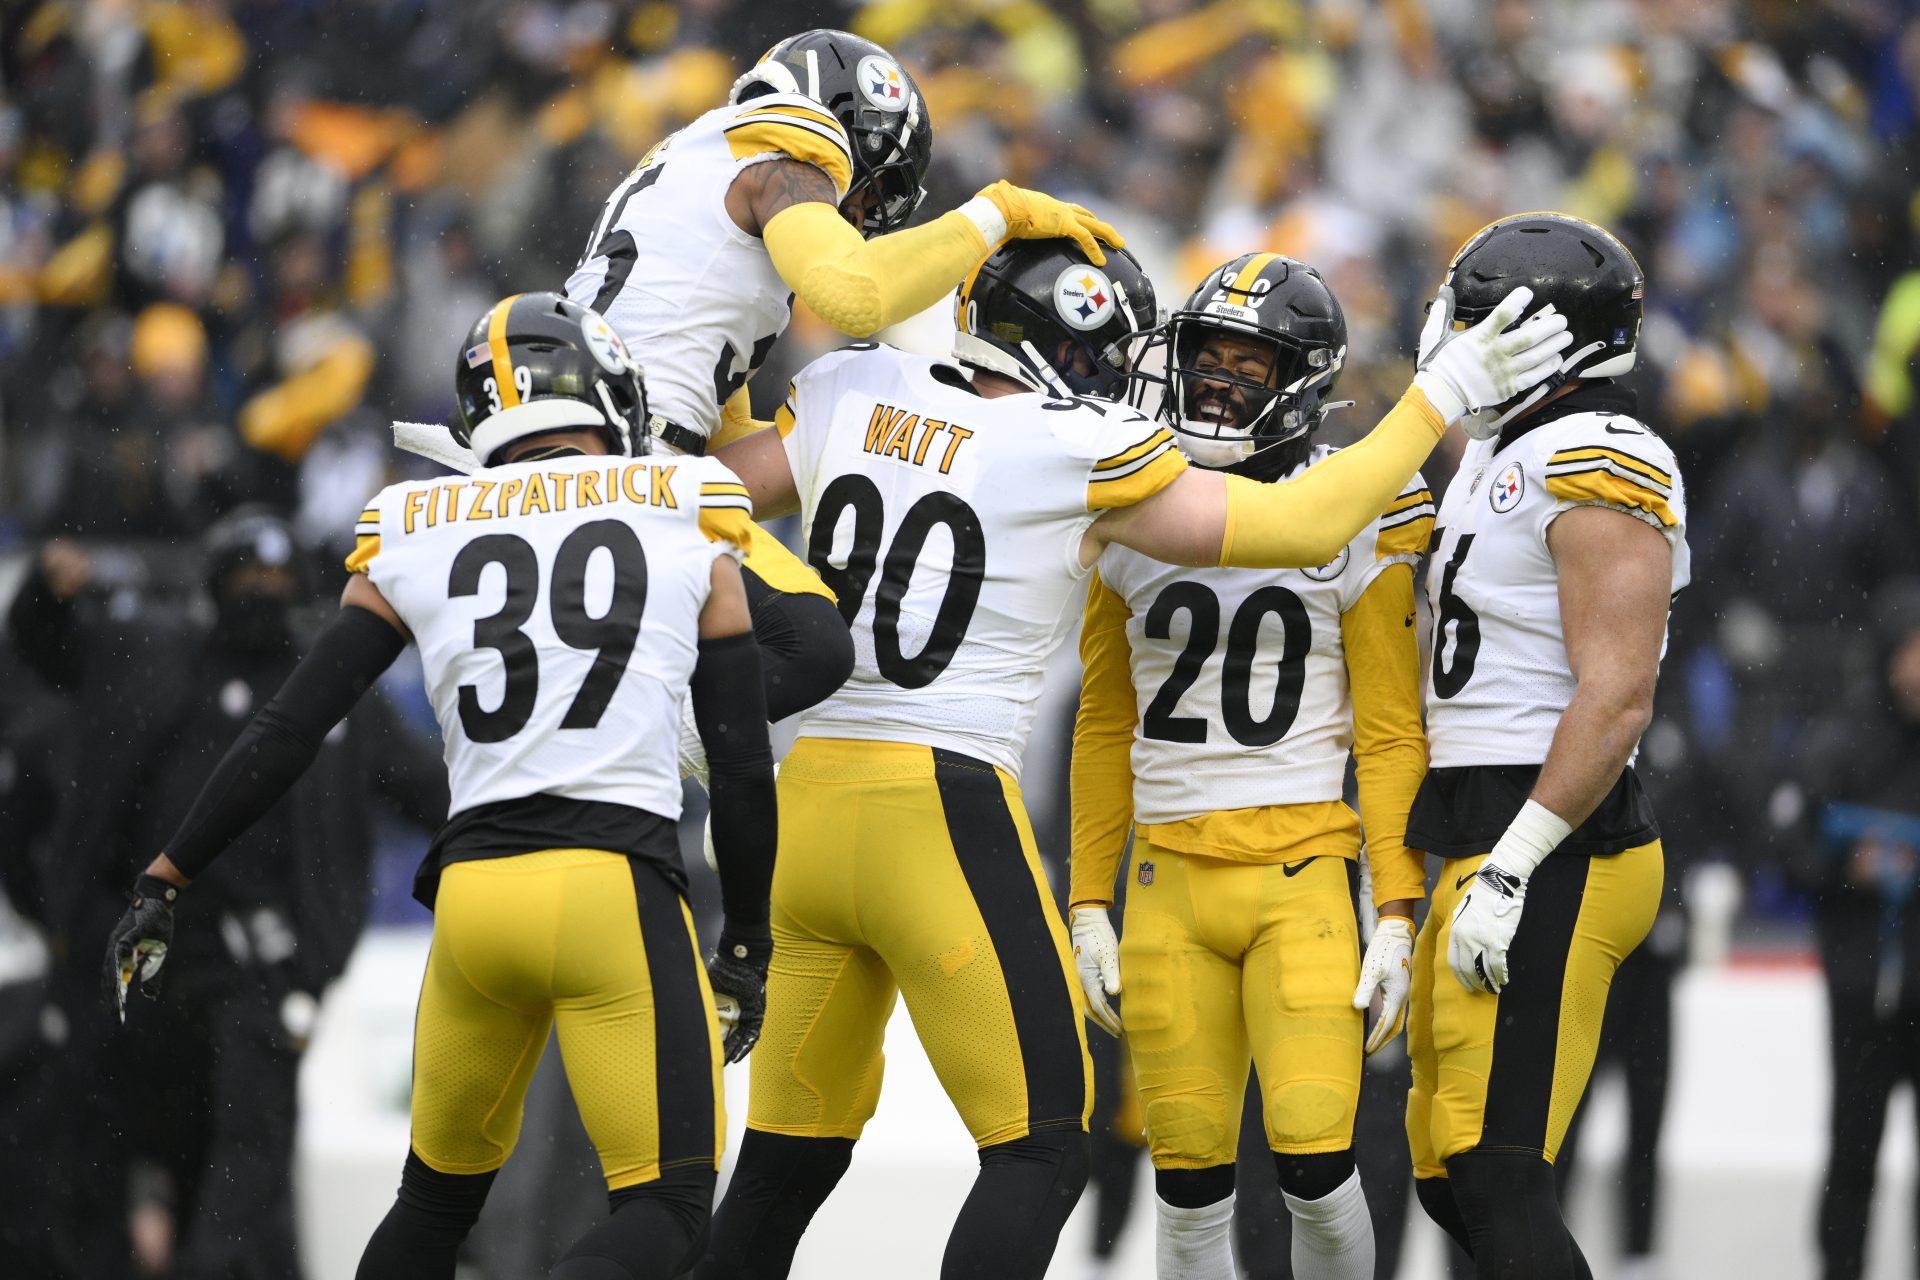 Pittsburgh Steelers outside linebacker T.J. Watt (90) celebrates with teammates, from left, free safety Minkah Fitzpatrick (39), cornerback Arthur Maulet (35), cornerback Cameron Sutton (20) and outside linebacker Alex Highsmith (56) after recording a forced fumble against Baltimore Ravens quarterback Tyler Huntley during the first half of an NFL football game, Sunday, Jan. 9, 2022, in Baltimore.